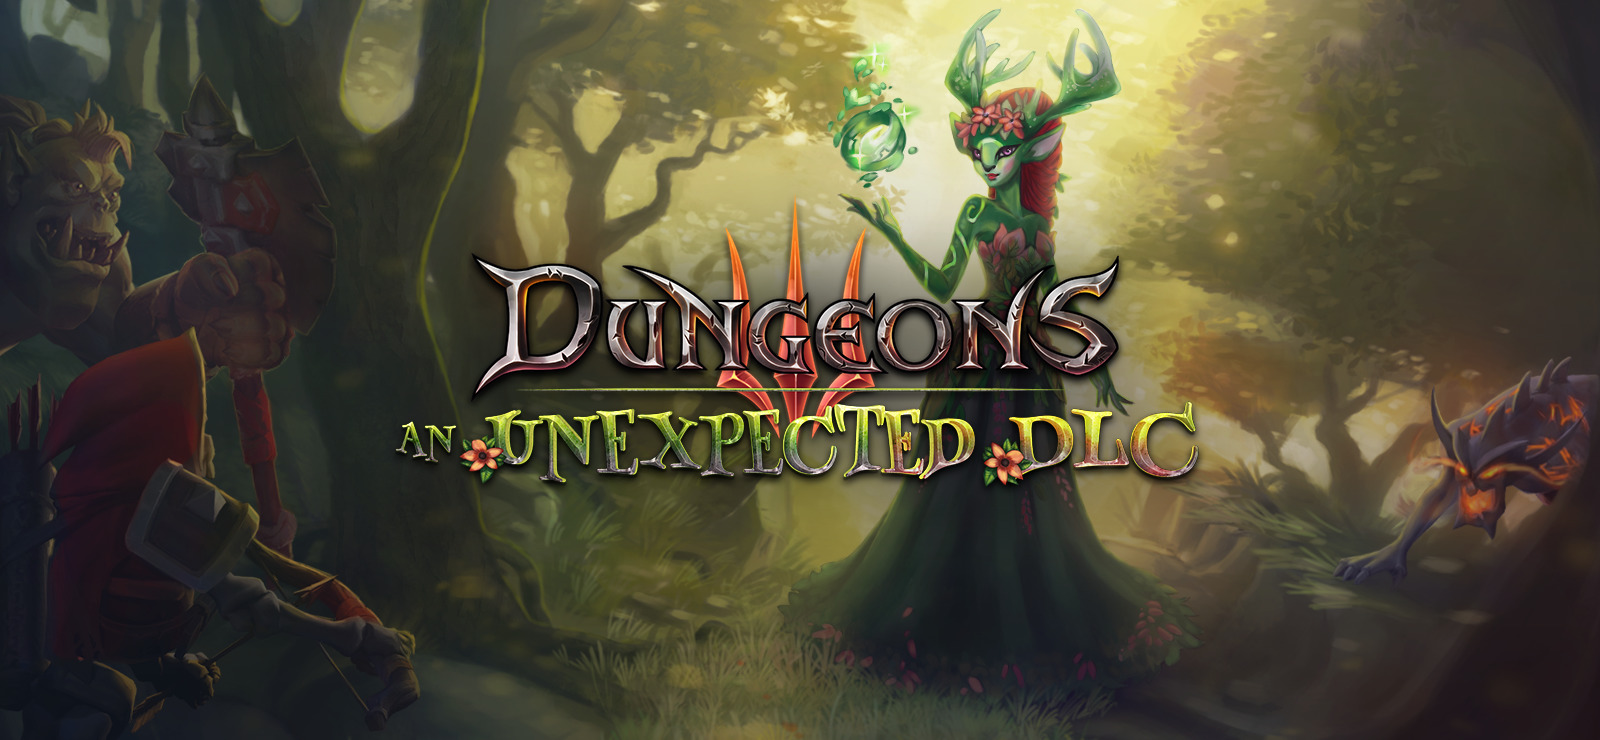 Dungeons 3 1.7 build 11 + dlcs download free full